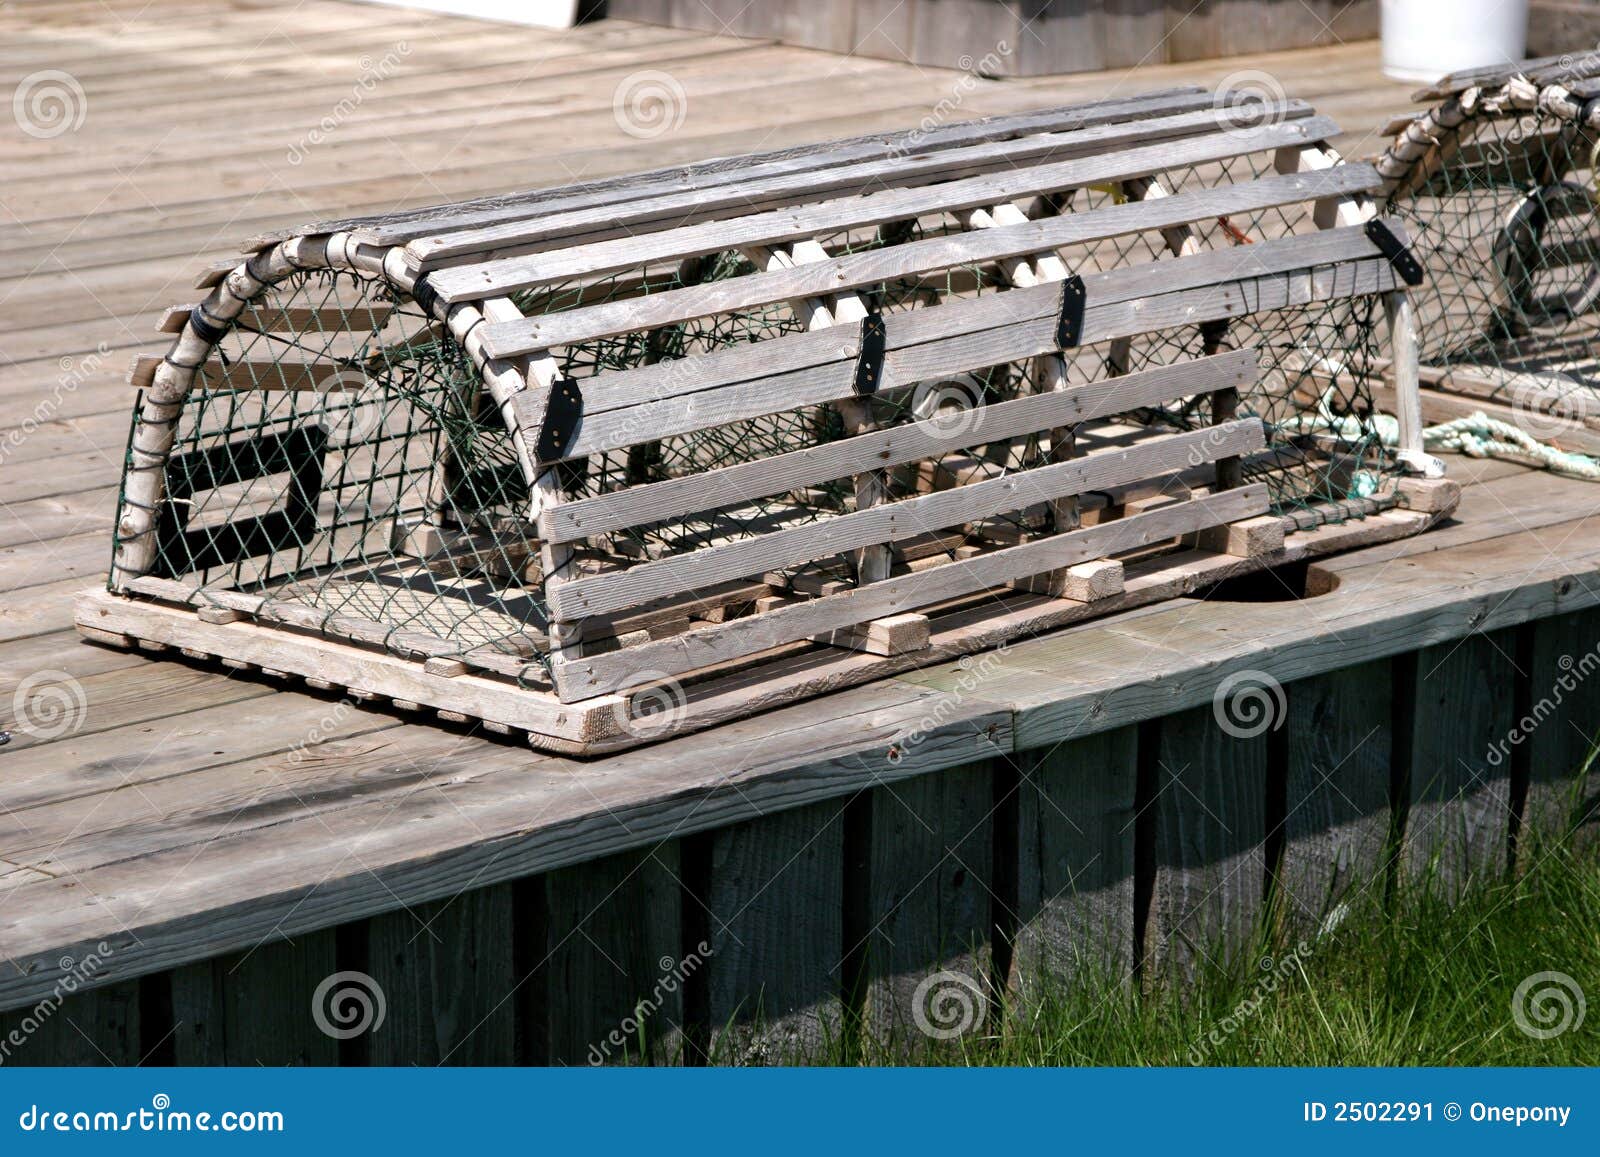 Lobster Trap stock image. Image of sitting, canada, maritimes - 2502291